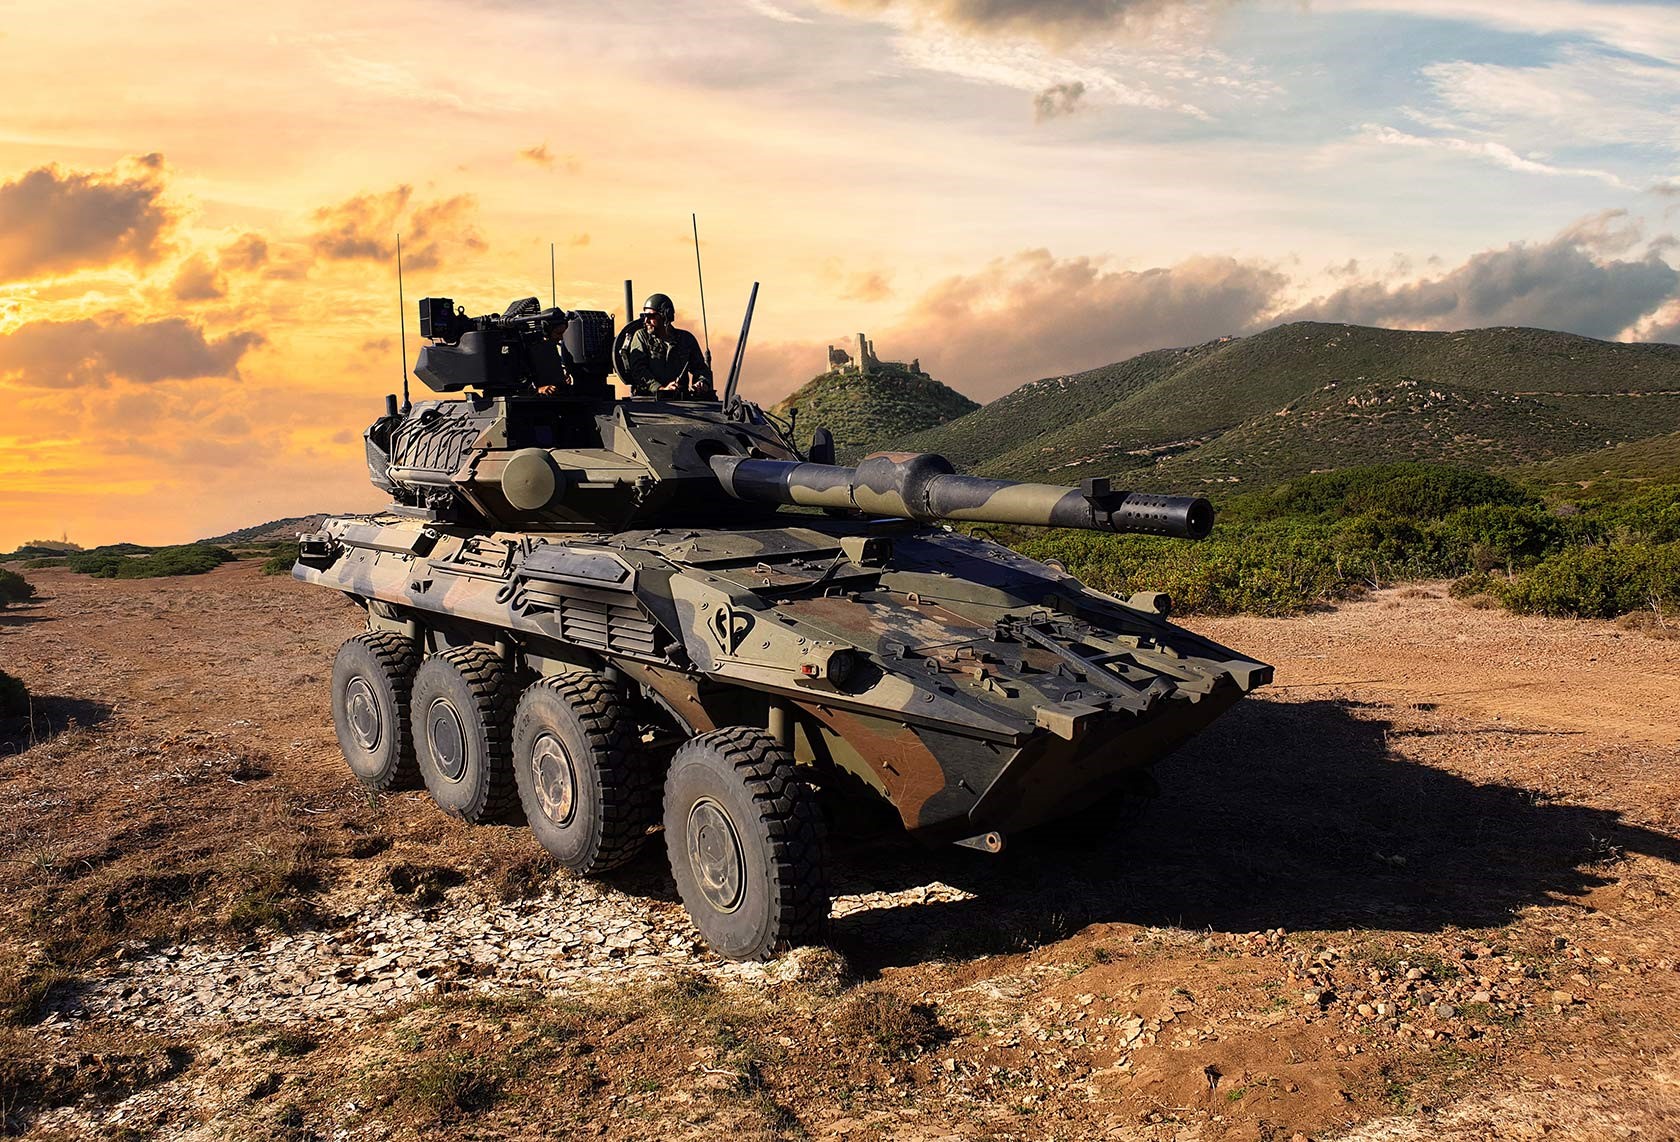 THE CENTAURO II FIRST CHOICE FOR THE NEW ARMOURED VEHICLE FOR THE BRAZILIAN ARMY